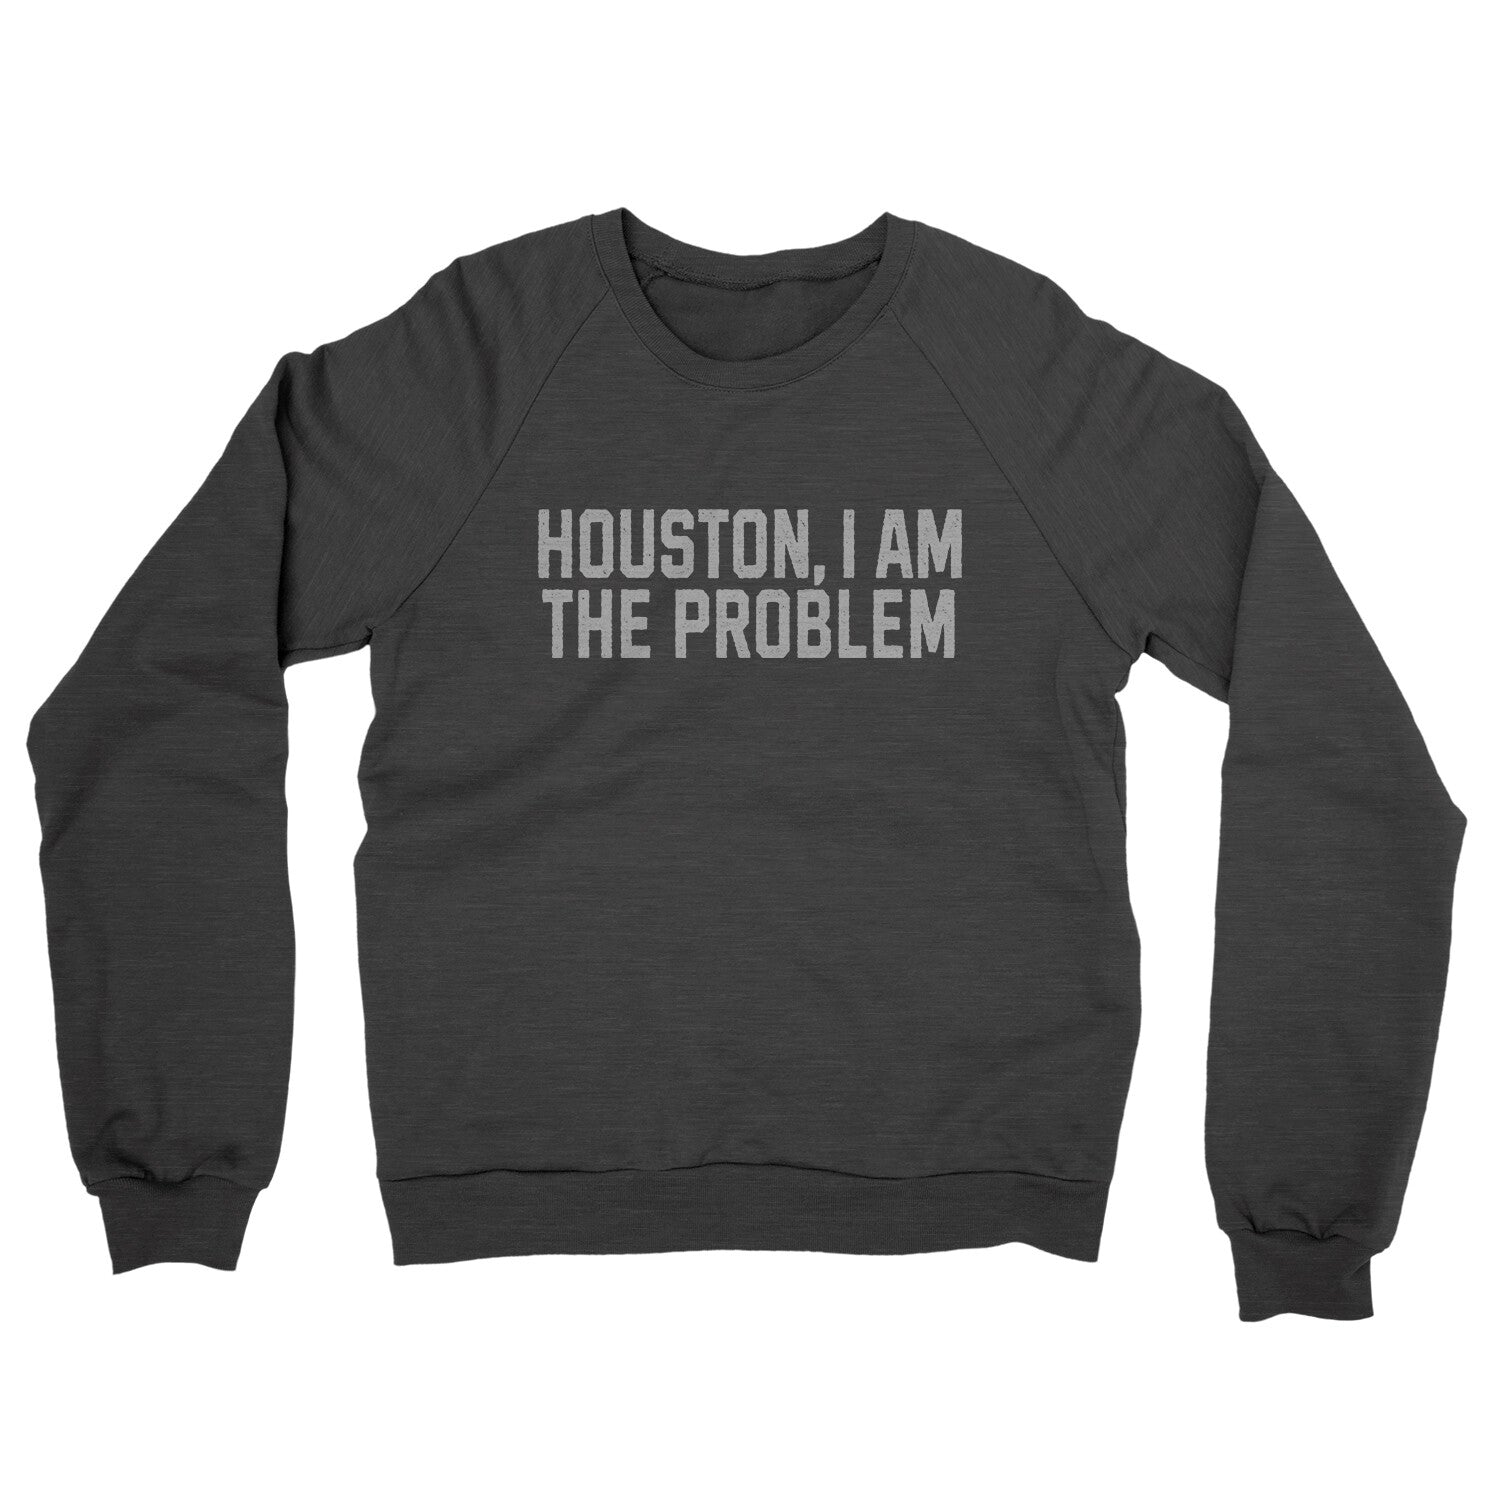 Houston I Am the Problem in Charcoal Heather Color